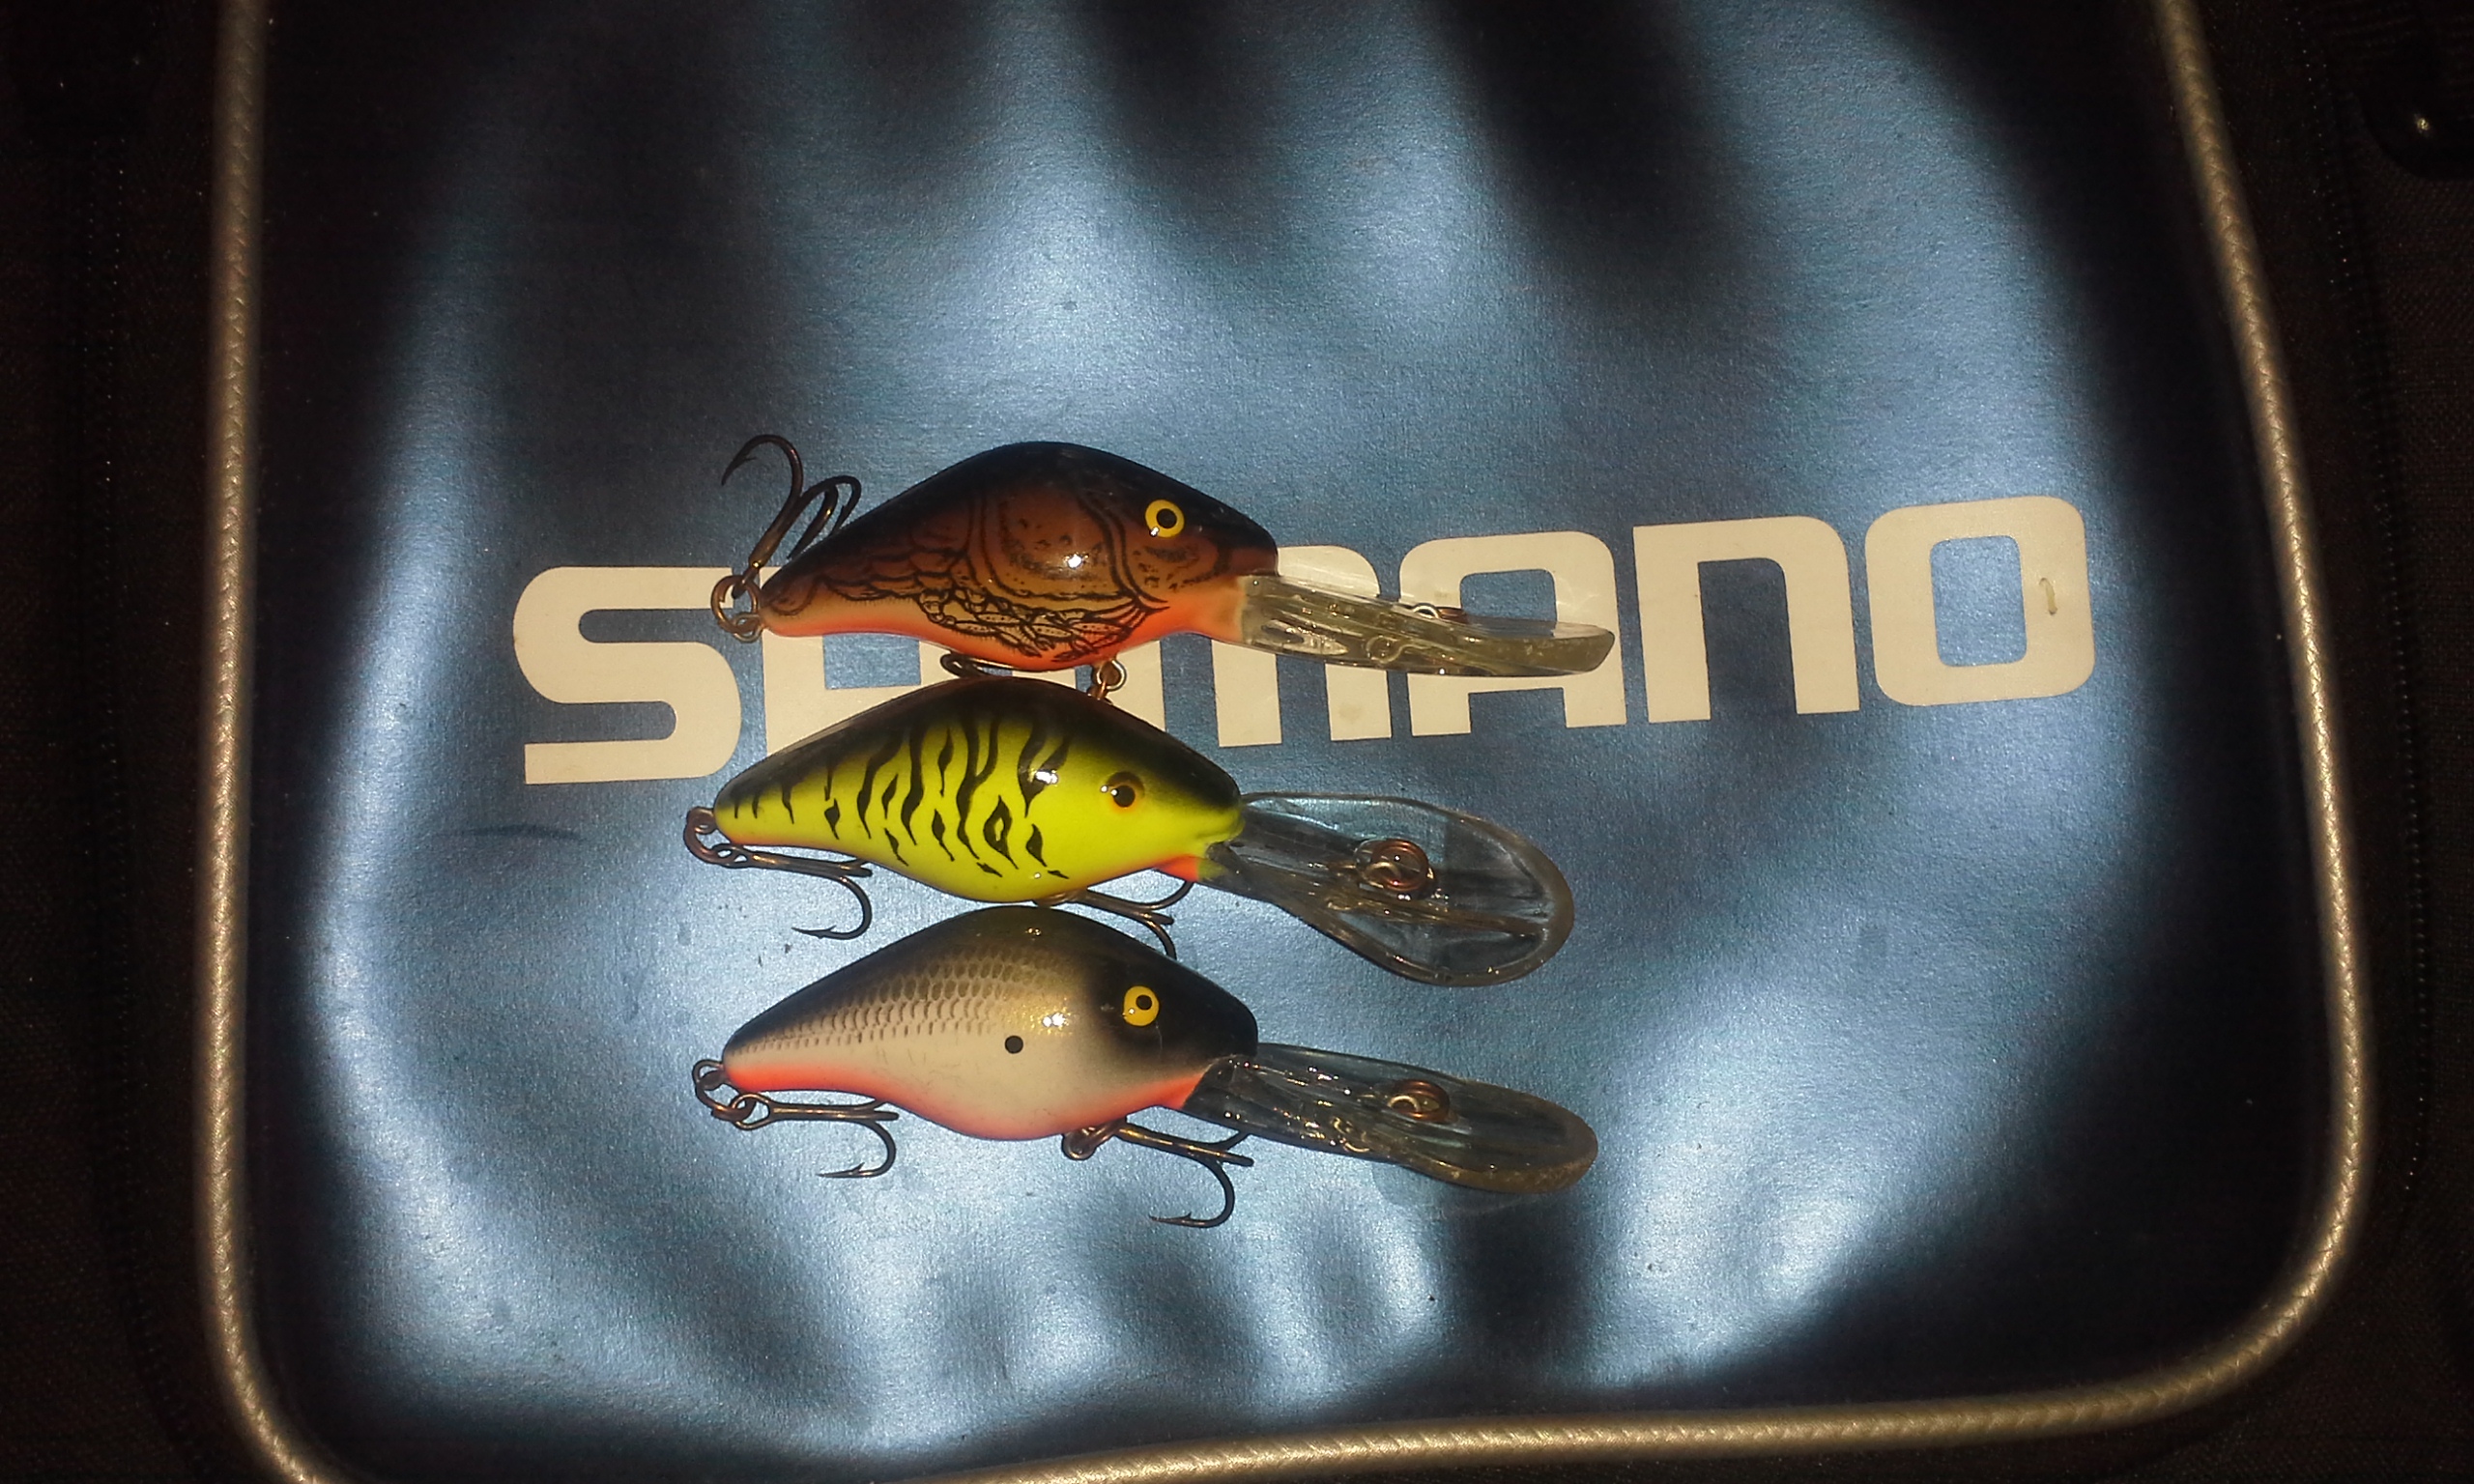 Lot of 5 Mann’s Hank Parker Classic Spinnerbait Vintage Fishing Lures 